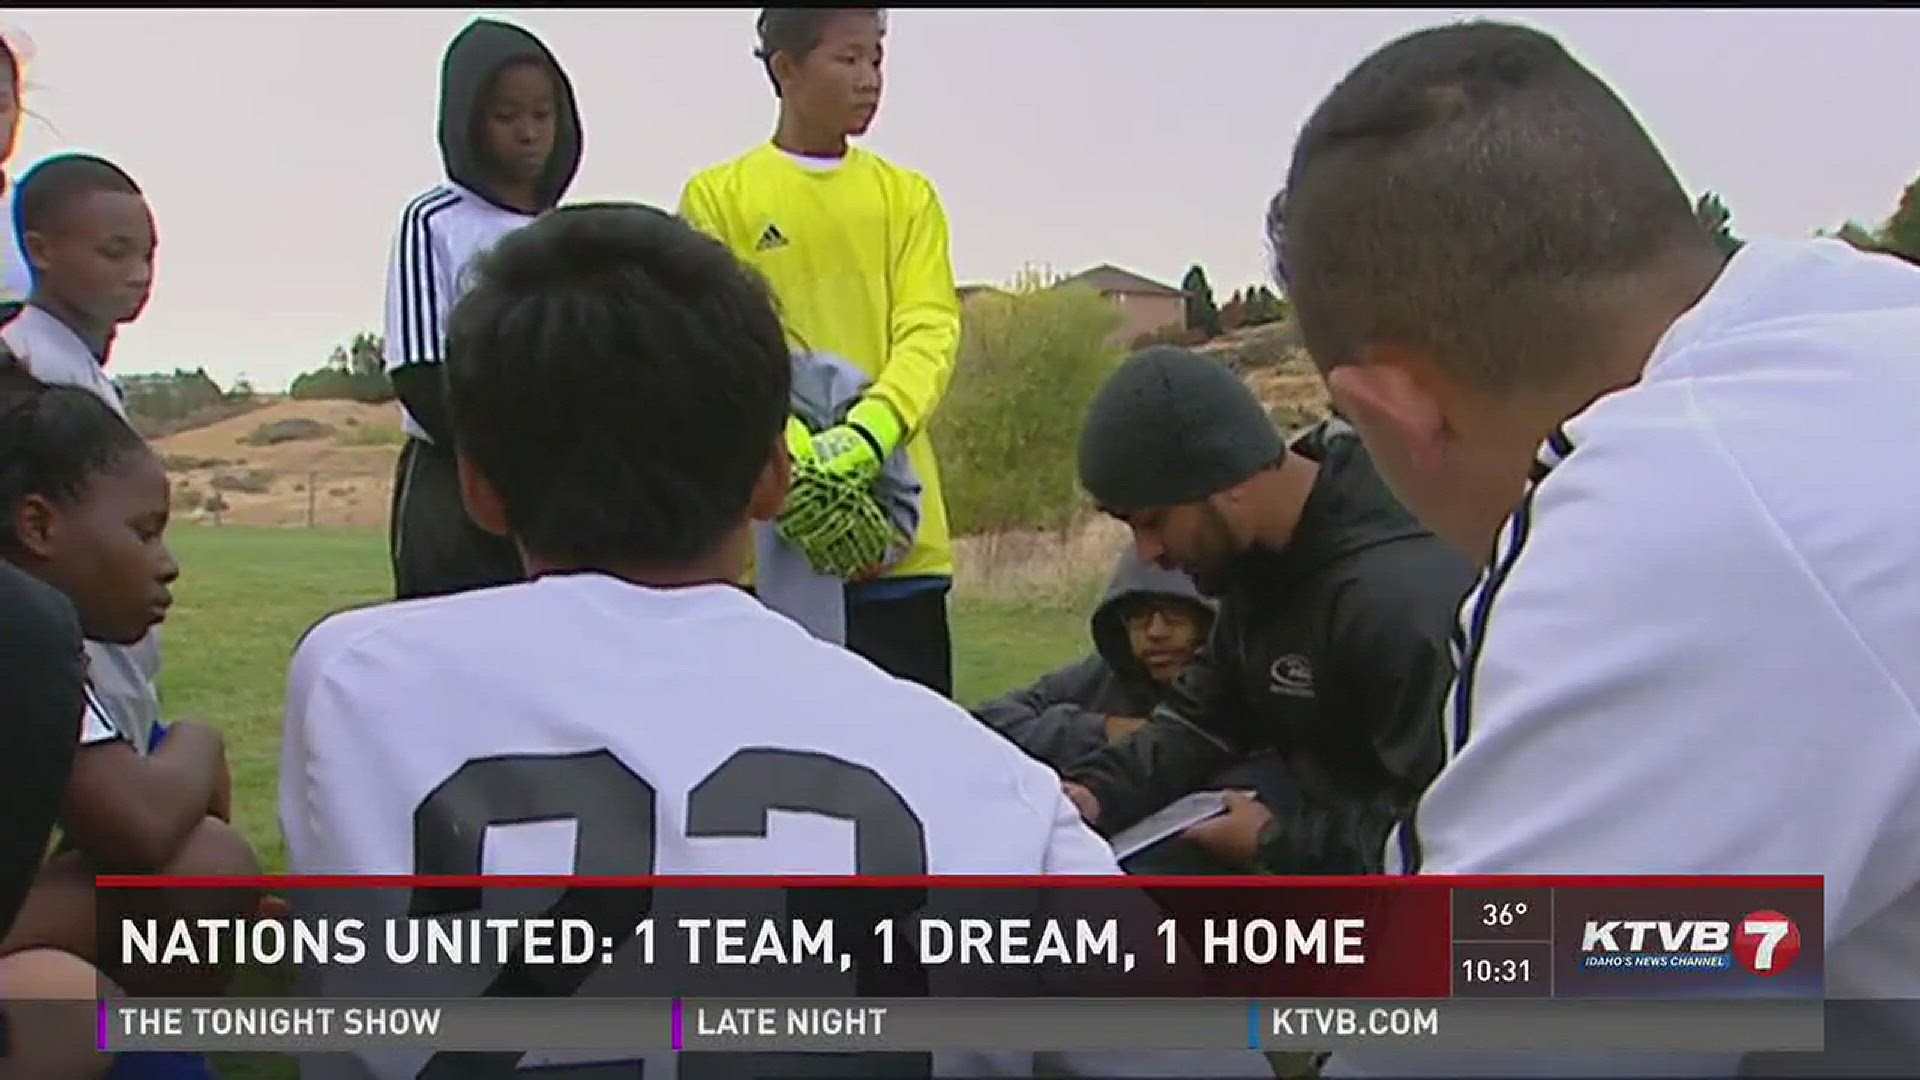 Nations United: 1 team, 1 dream, 1 home.